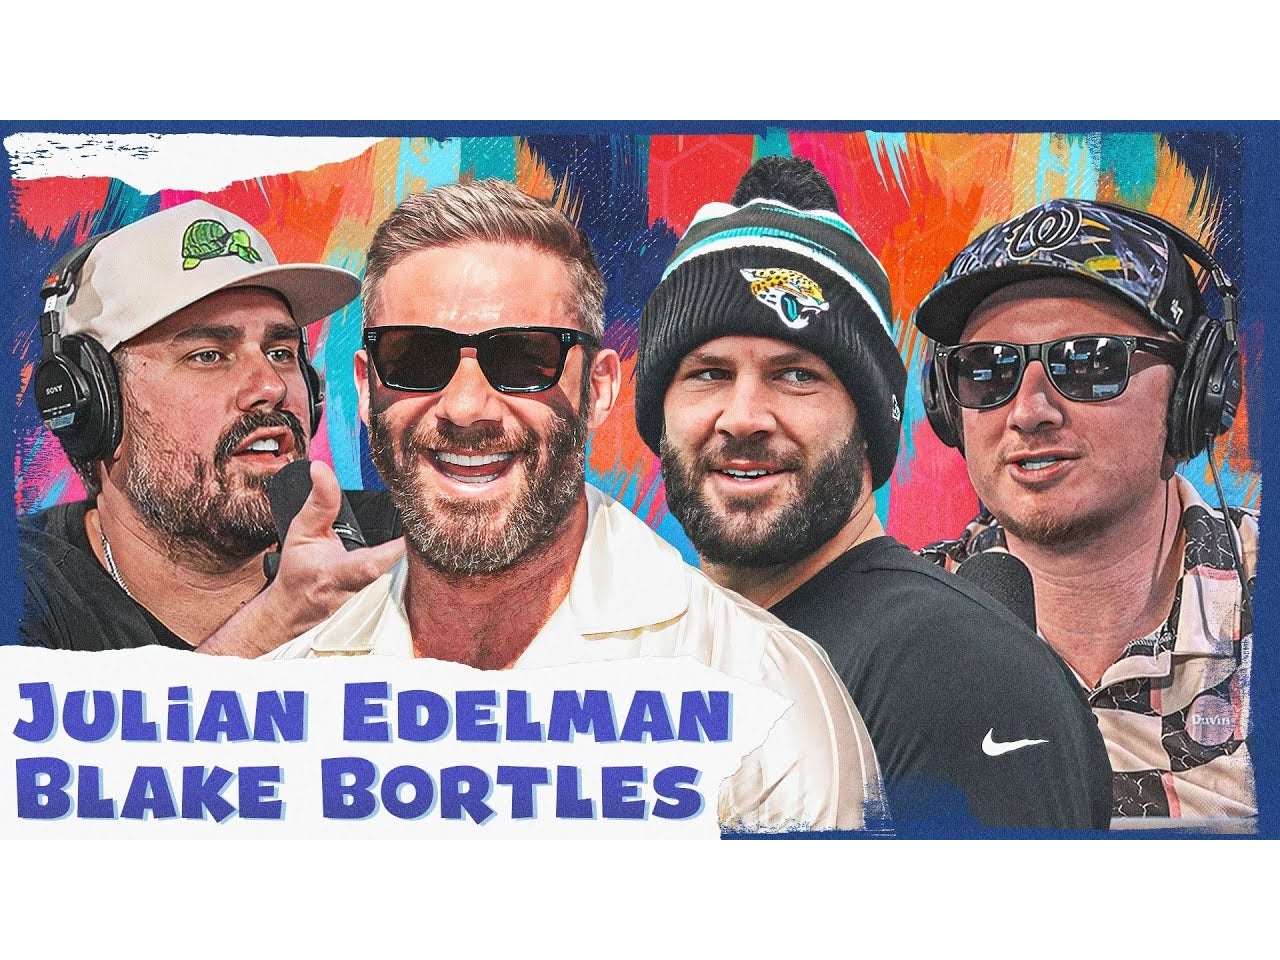 FULL VIDEO EPISODE: Julian Edelman, Blake Bortles, The Nuggets Are Back And We Have An Embrace Debate On Whether Or Not Any Of Us Have Hobbies